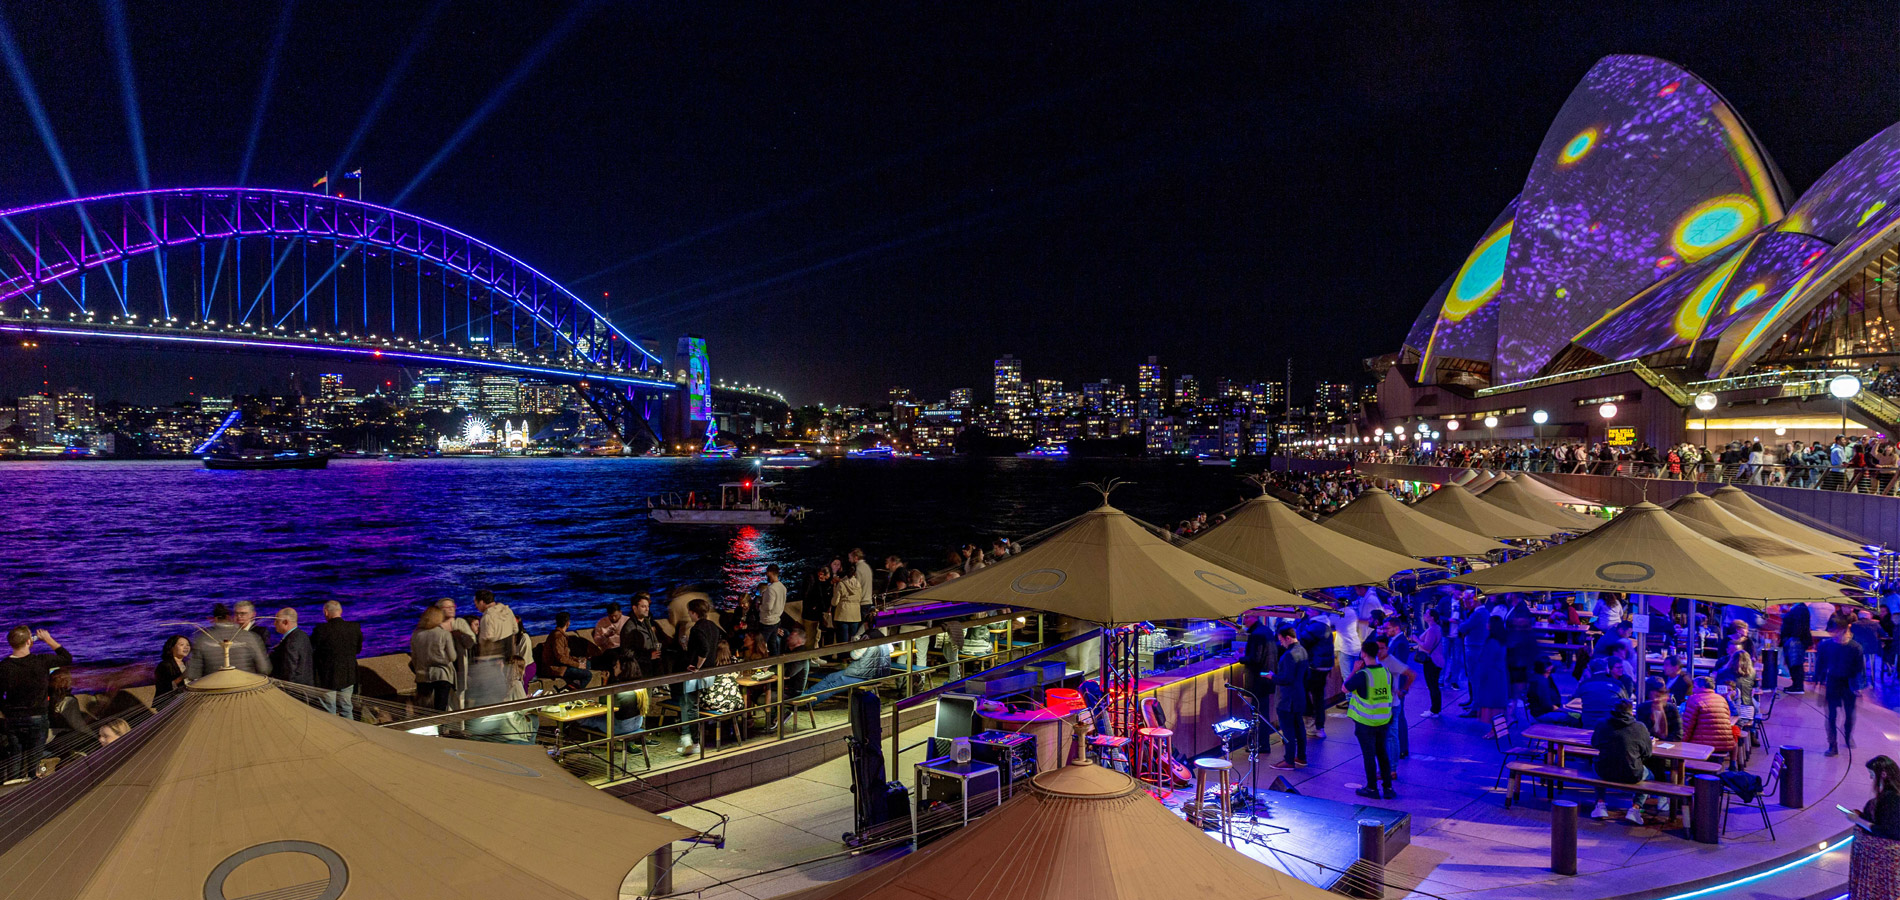 The Taste and Sound of Sydney